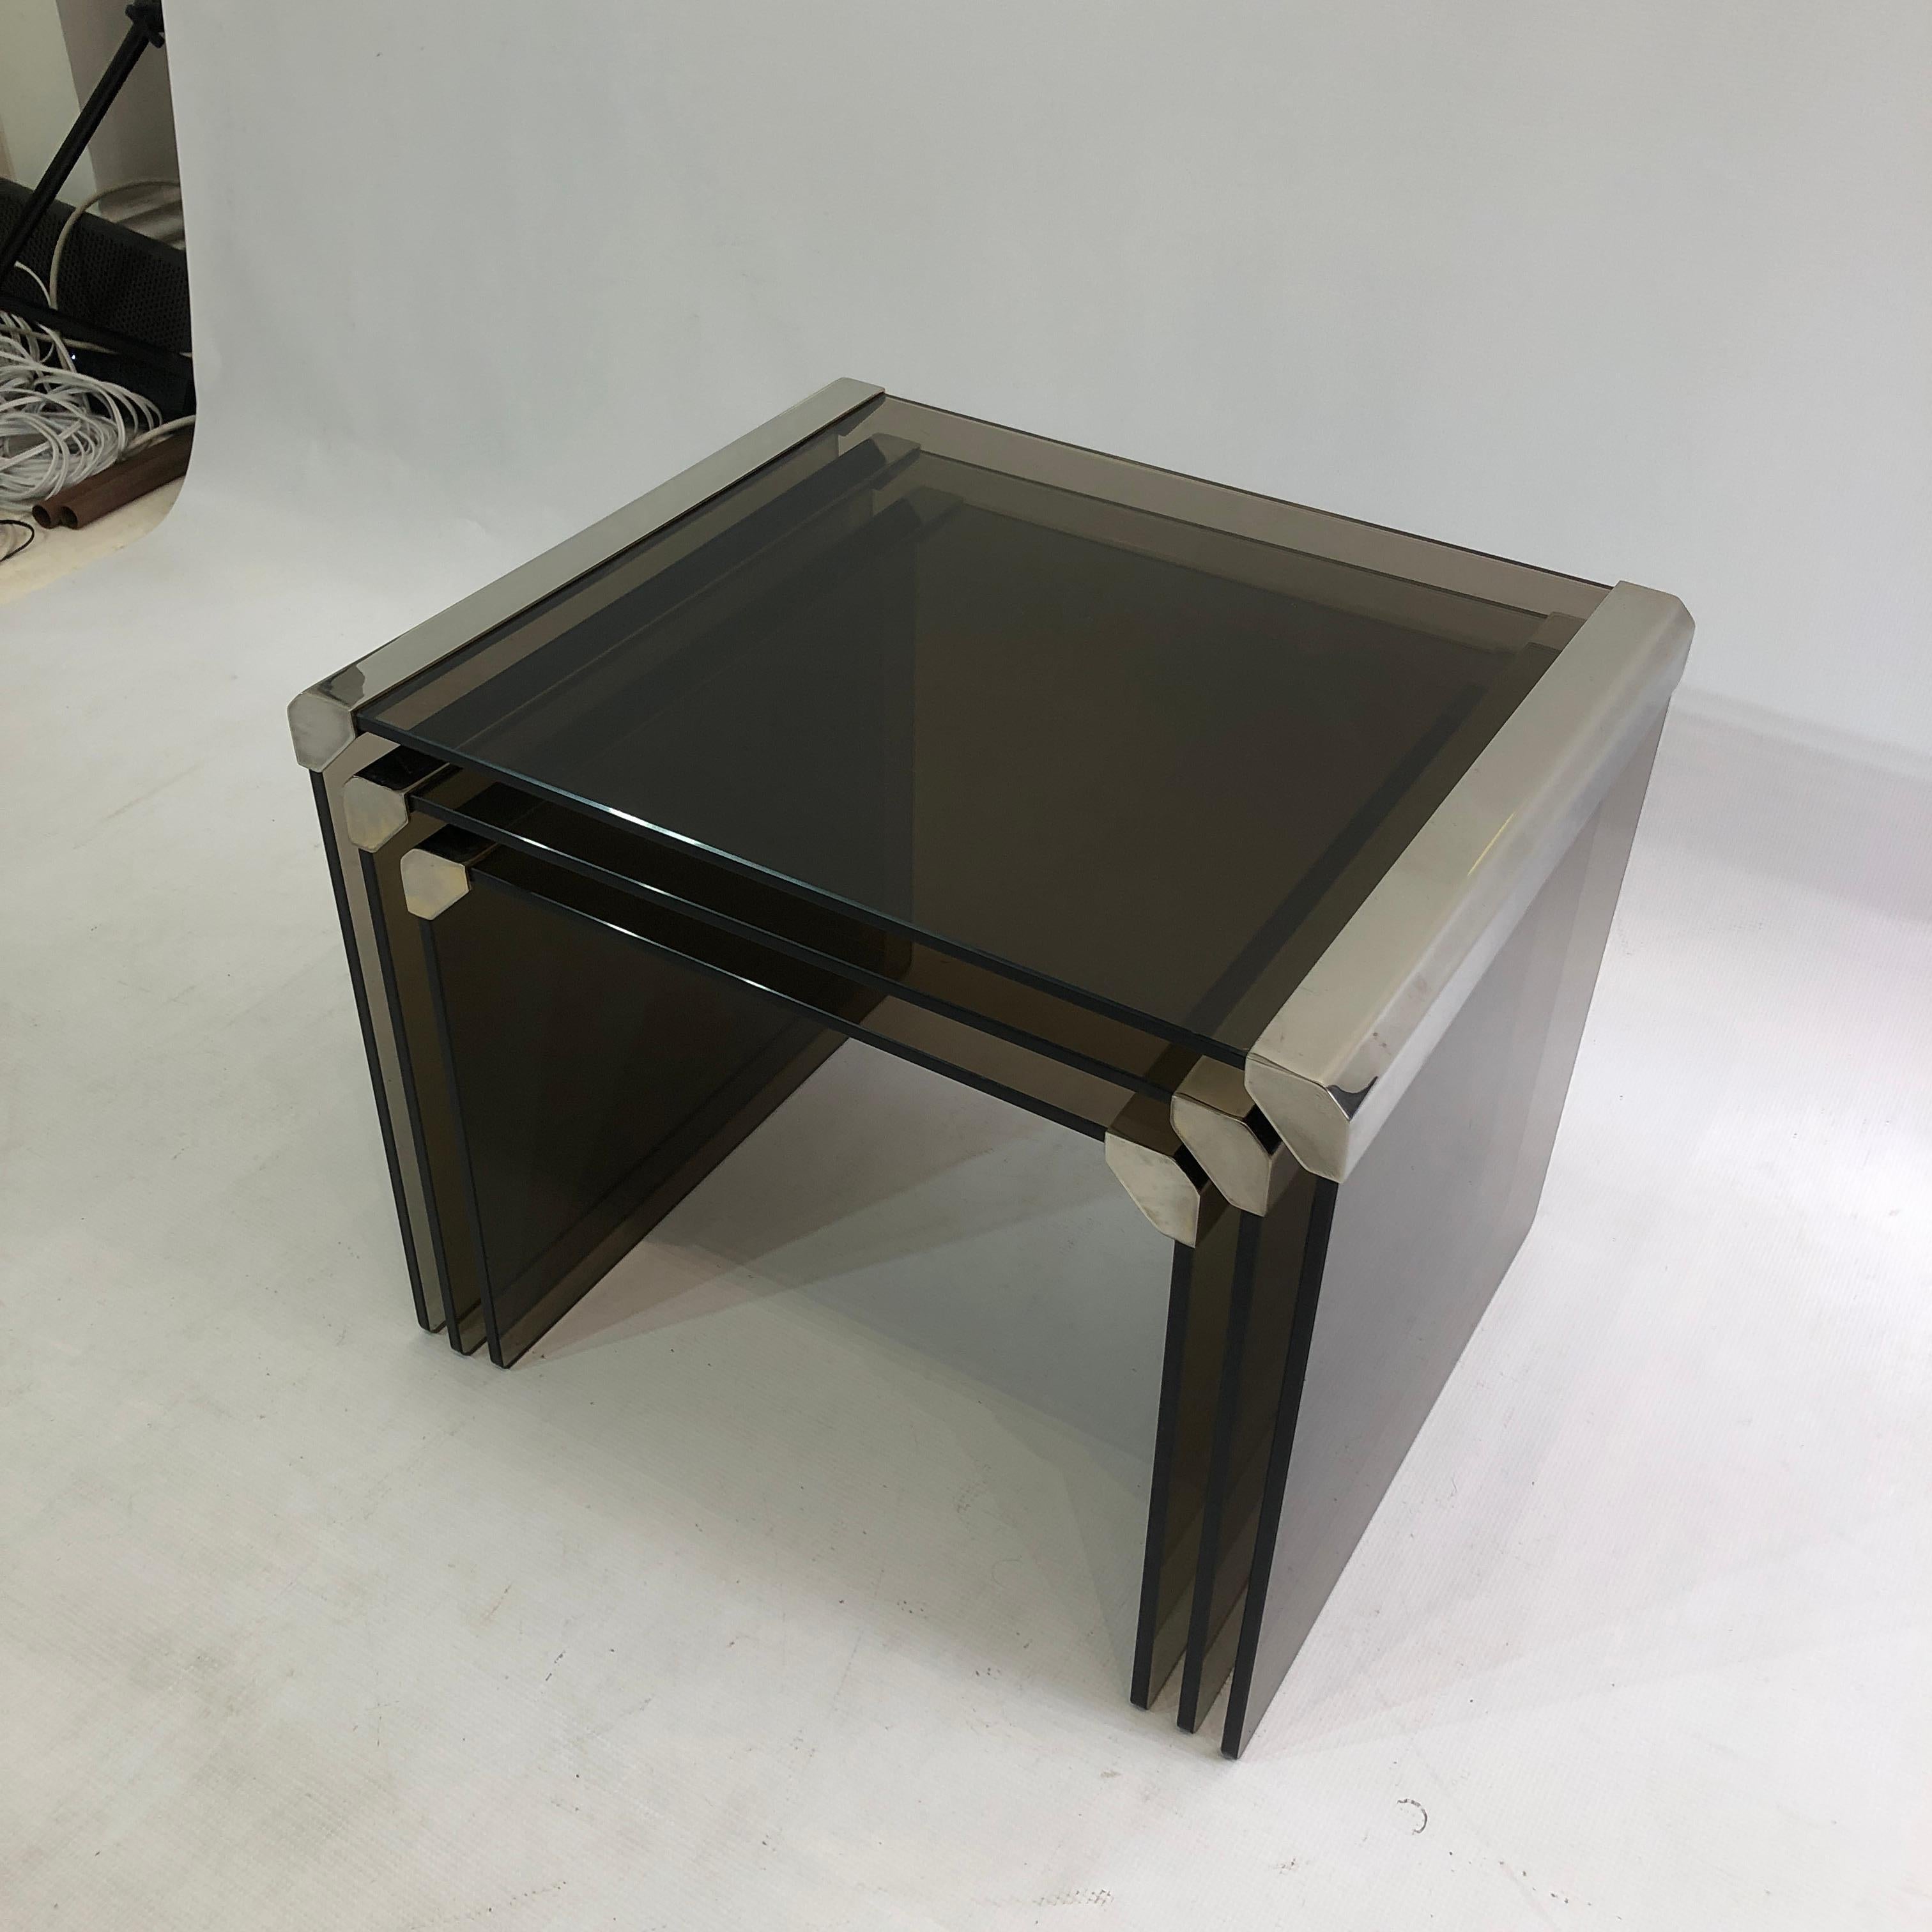 Nest of 1980s Italian tables in chrome frame and brown smoked tempered glass, from design powerhouses Gallotti & Radice. Imported from Italy to the UK in the 1990s.

The smoked glass sits in a chrome frame, with a modernist polygonal edge.  

Very